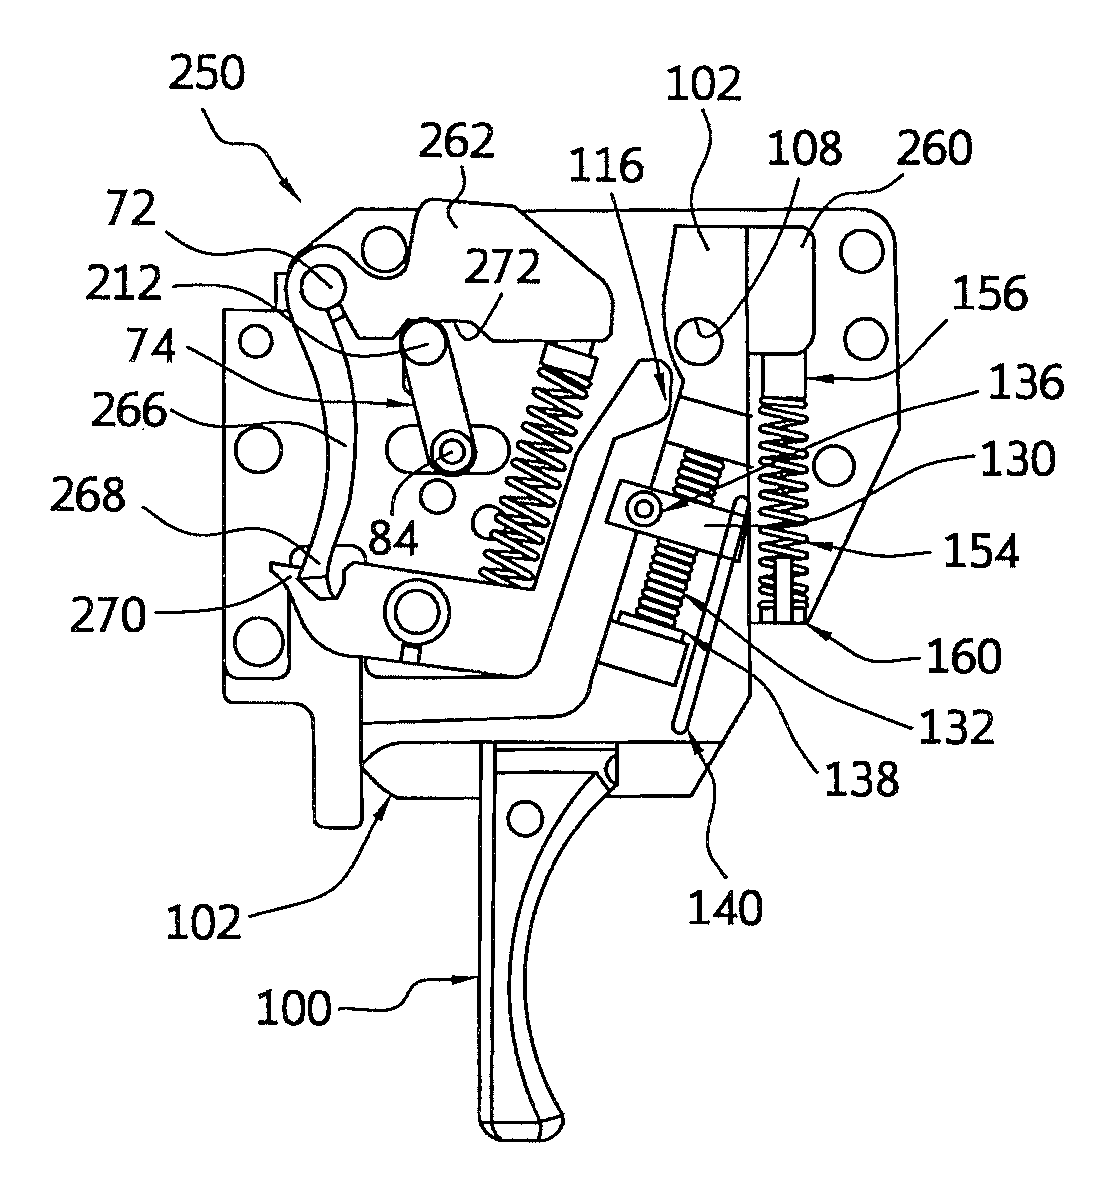 Drop-in adjustable trigger assembly with camming safety linkage